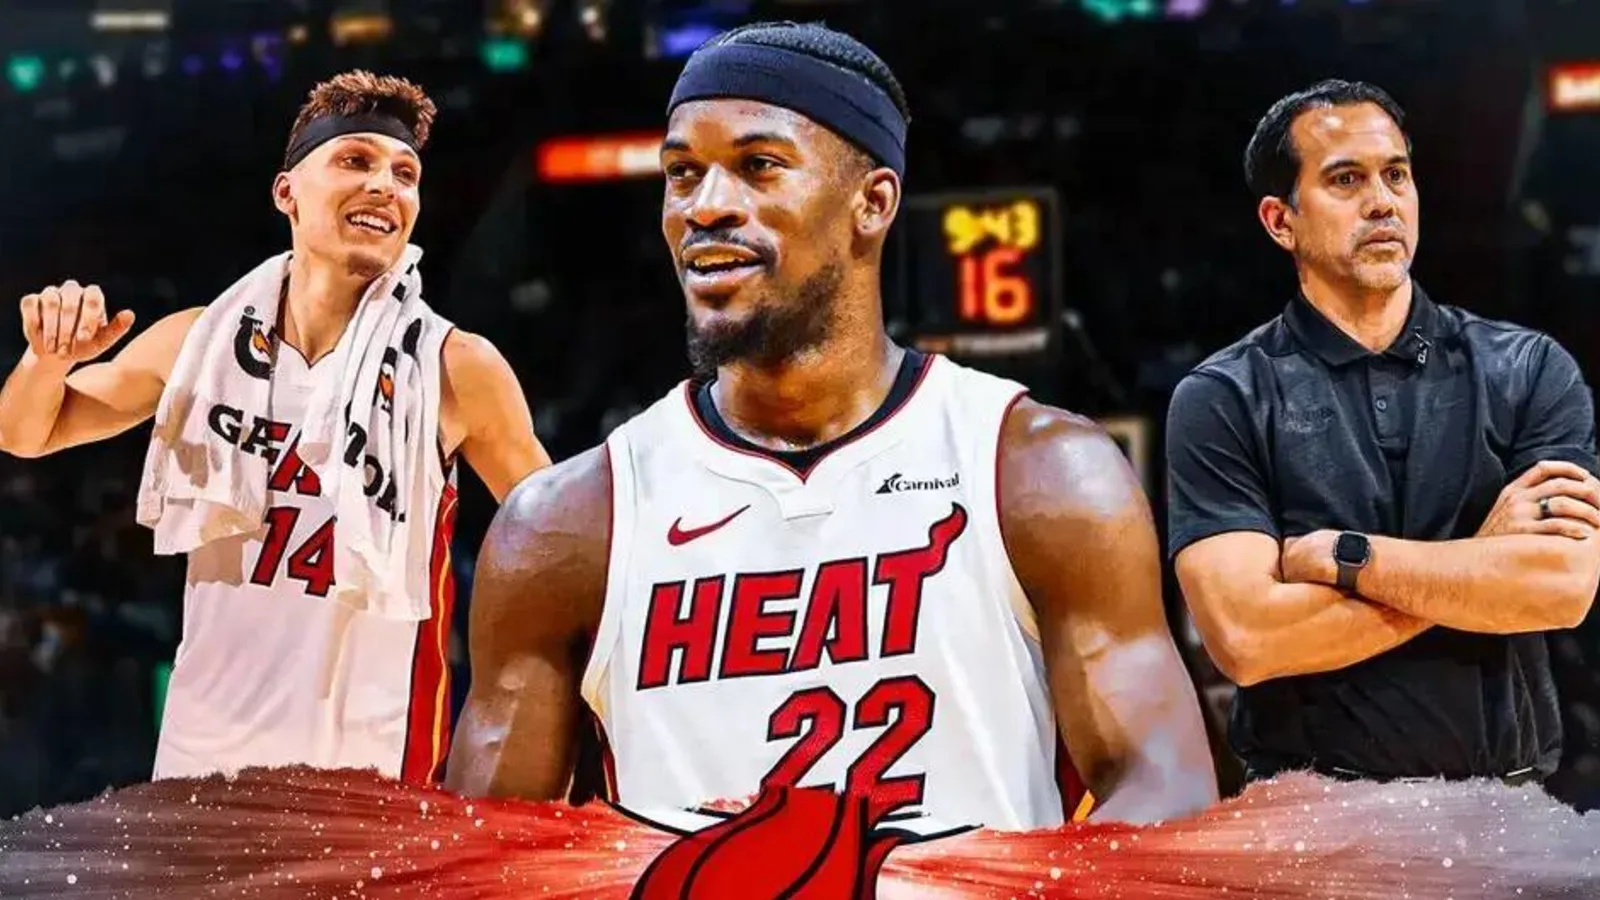 Will Jimmy Butler Swap Teams With Klay Thompson? Inside the Heat-Warriors Trade Talks